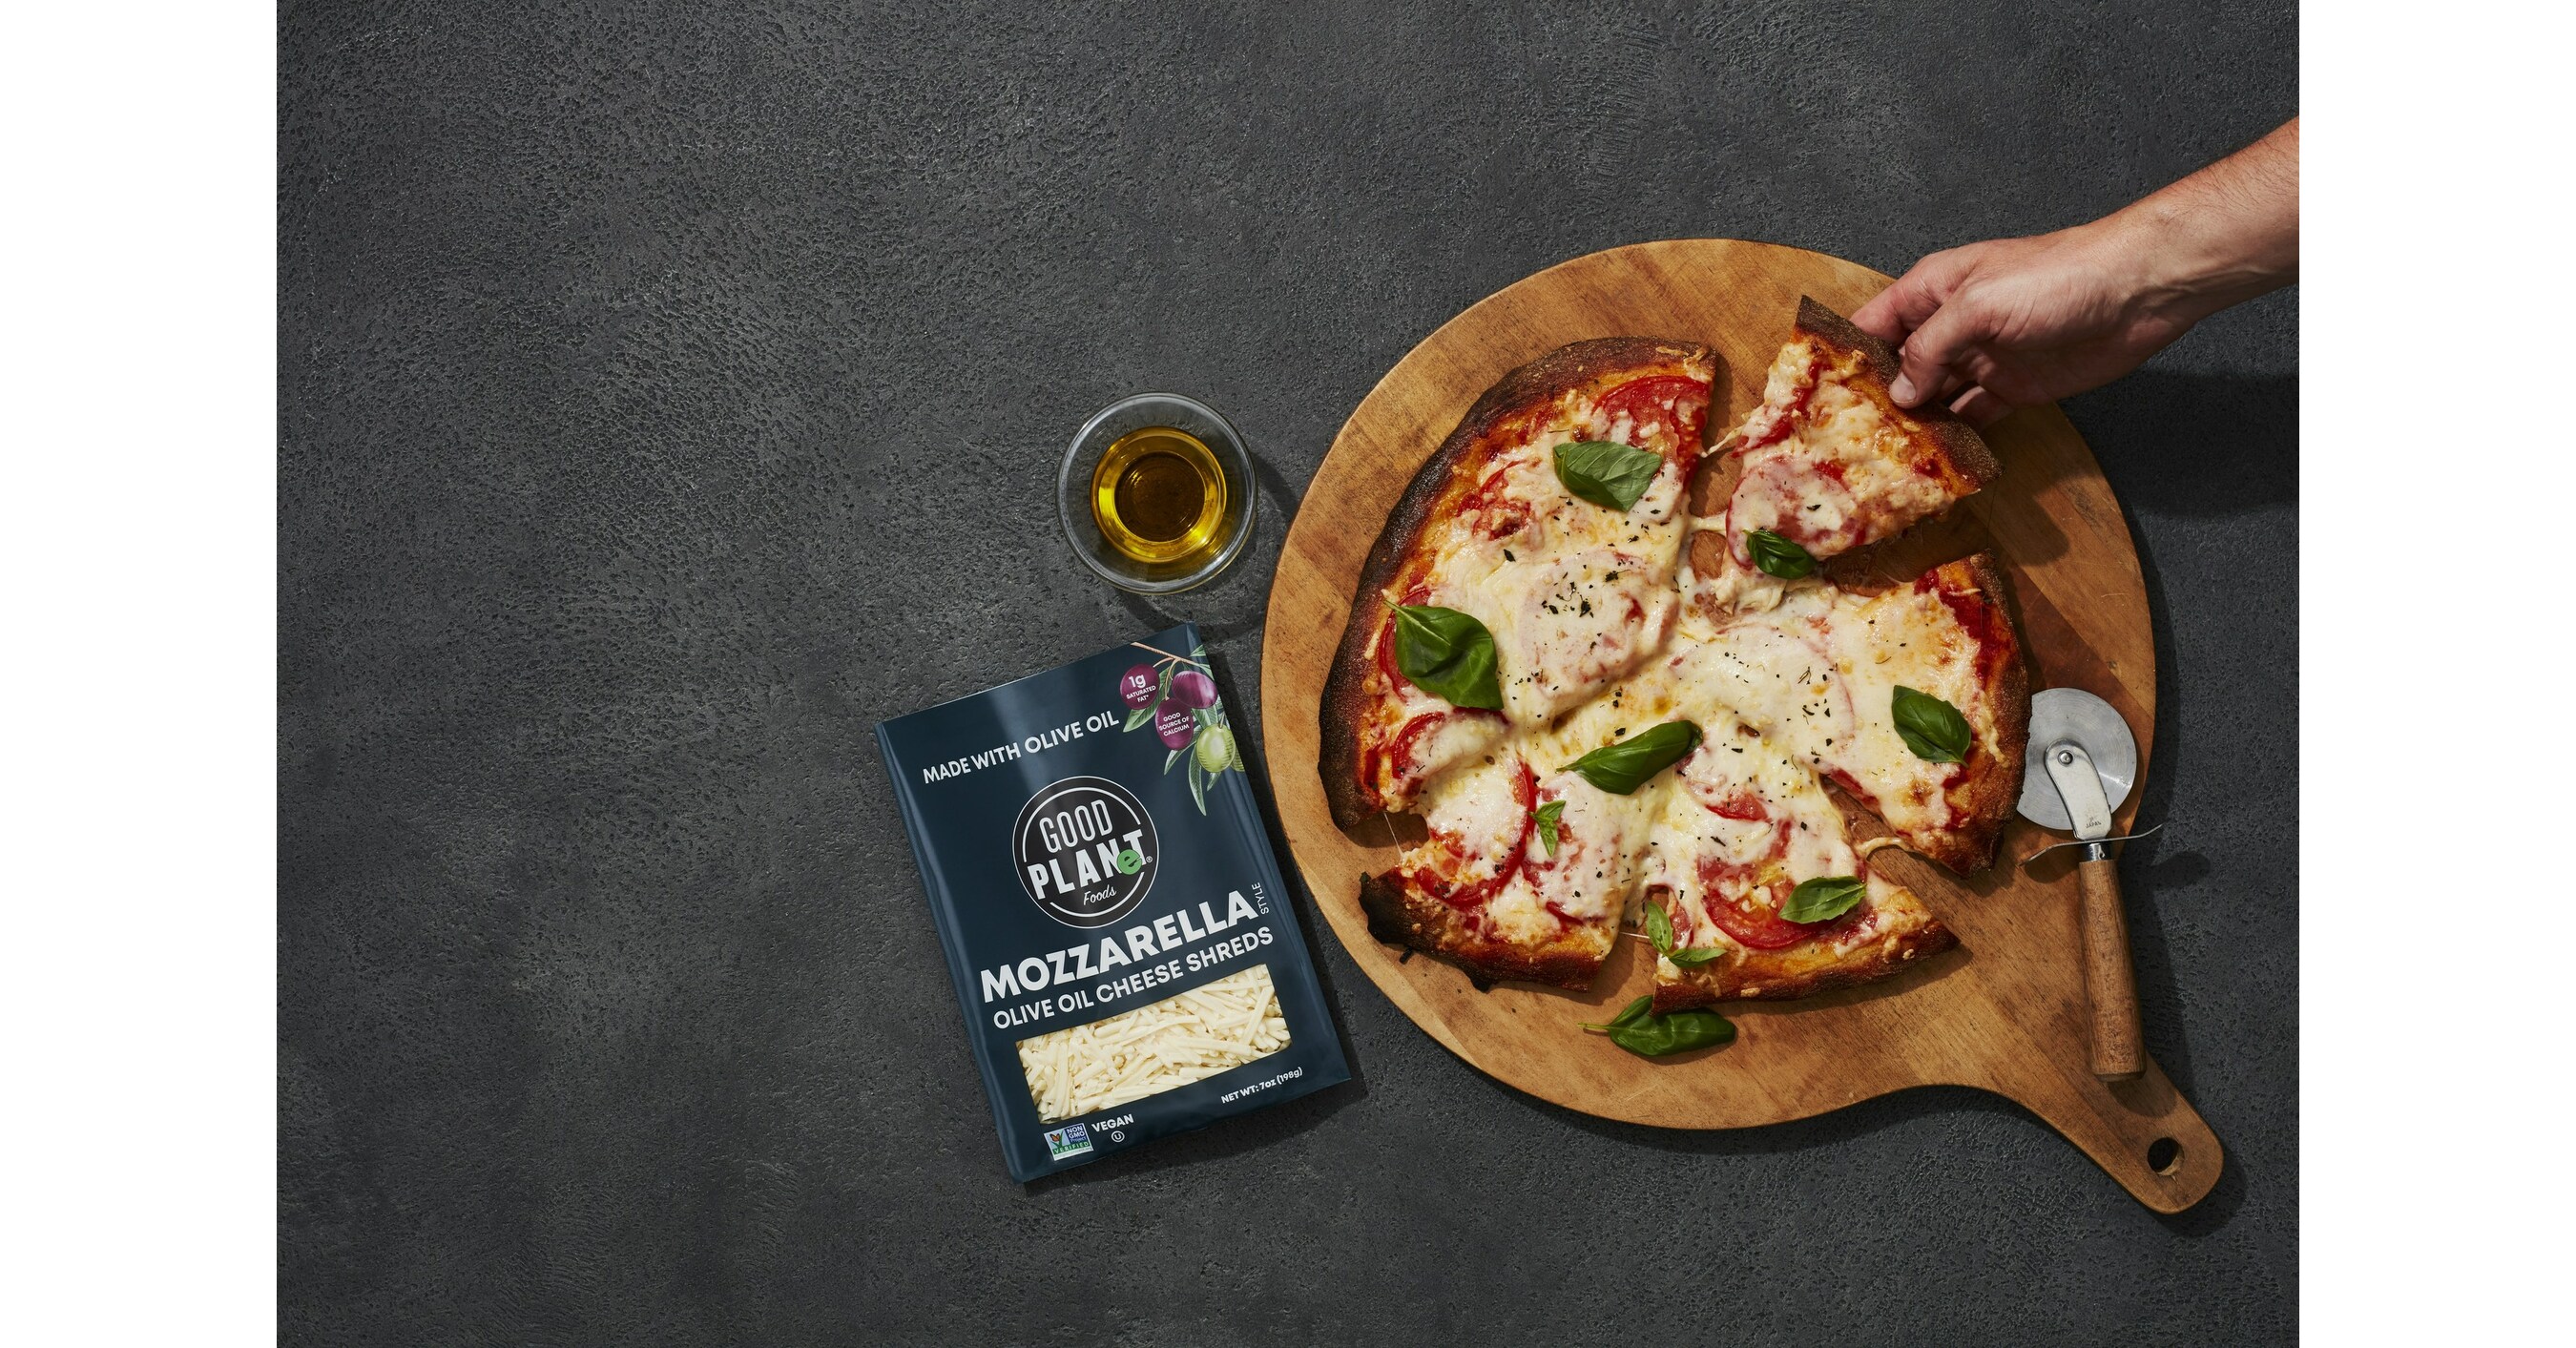 SCORE A FREE PIZZA FROM GOOD PLANET FOODS ON NATIONAL PIZZA DAY